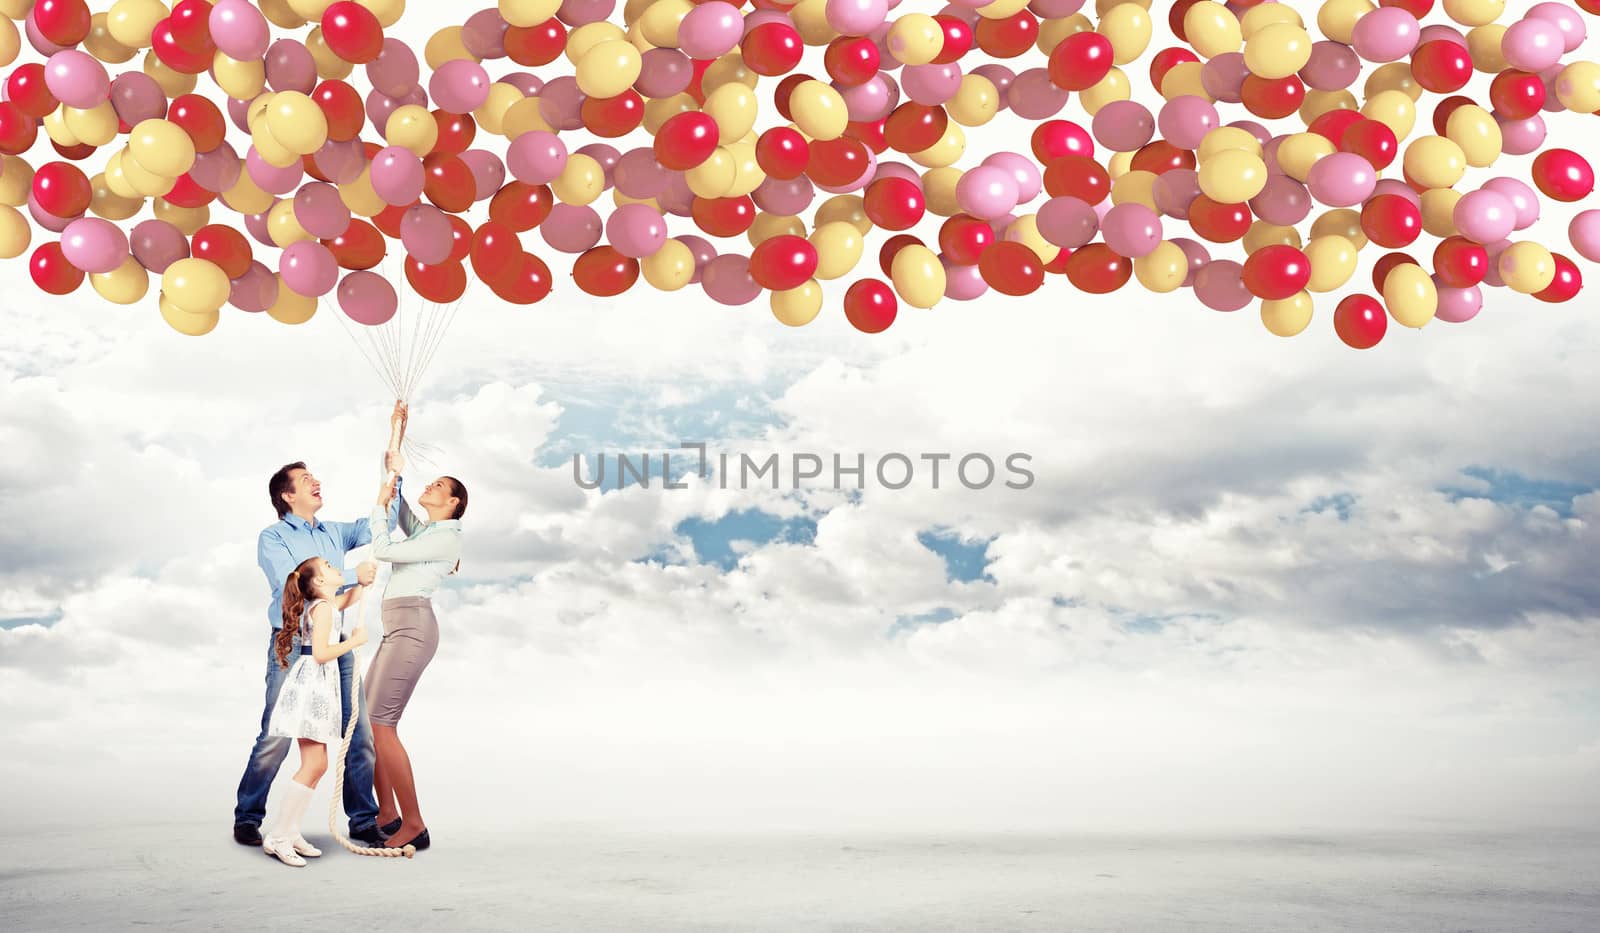 Family holding colorful balloons by sergey_nivens